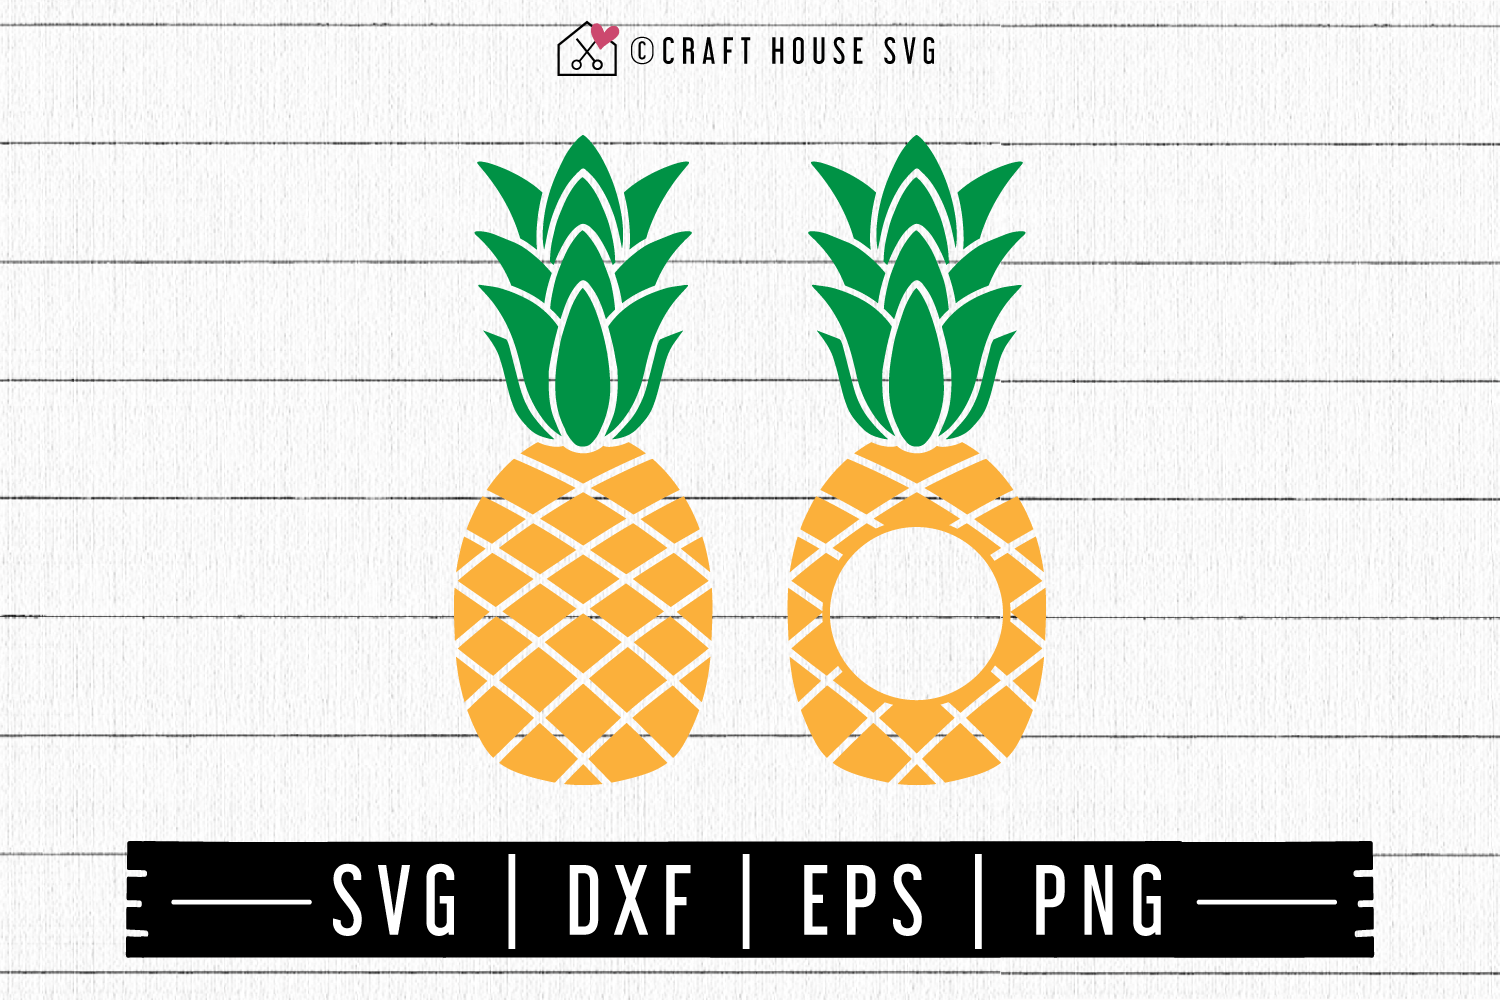 FREE Pineapple SVG | FB123 Craft House SVG - SVG files for Cricut and Silhouette